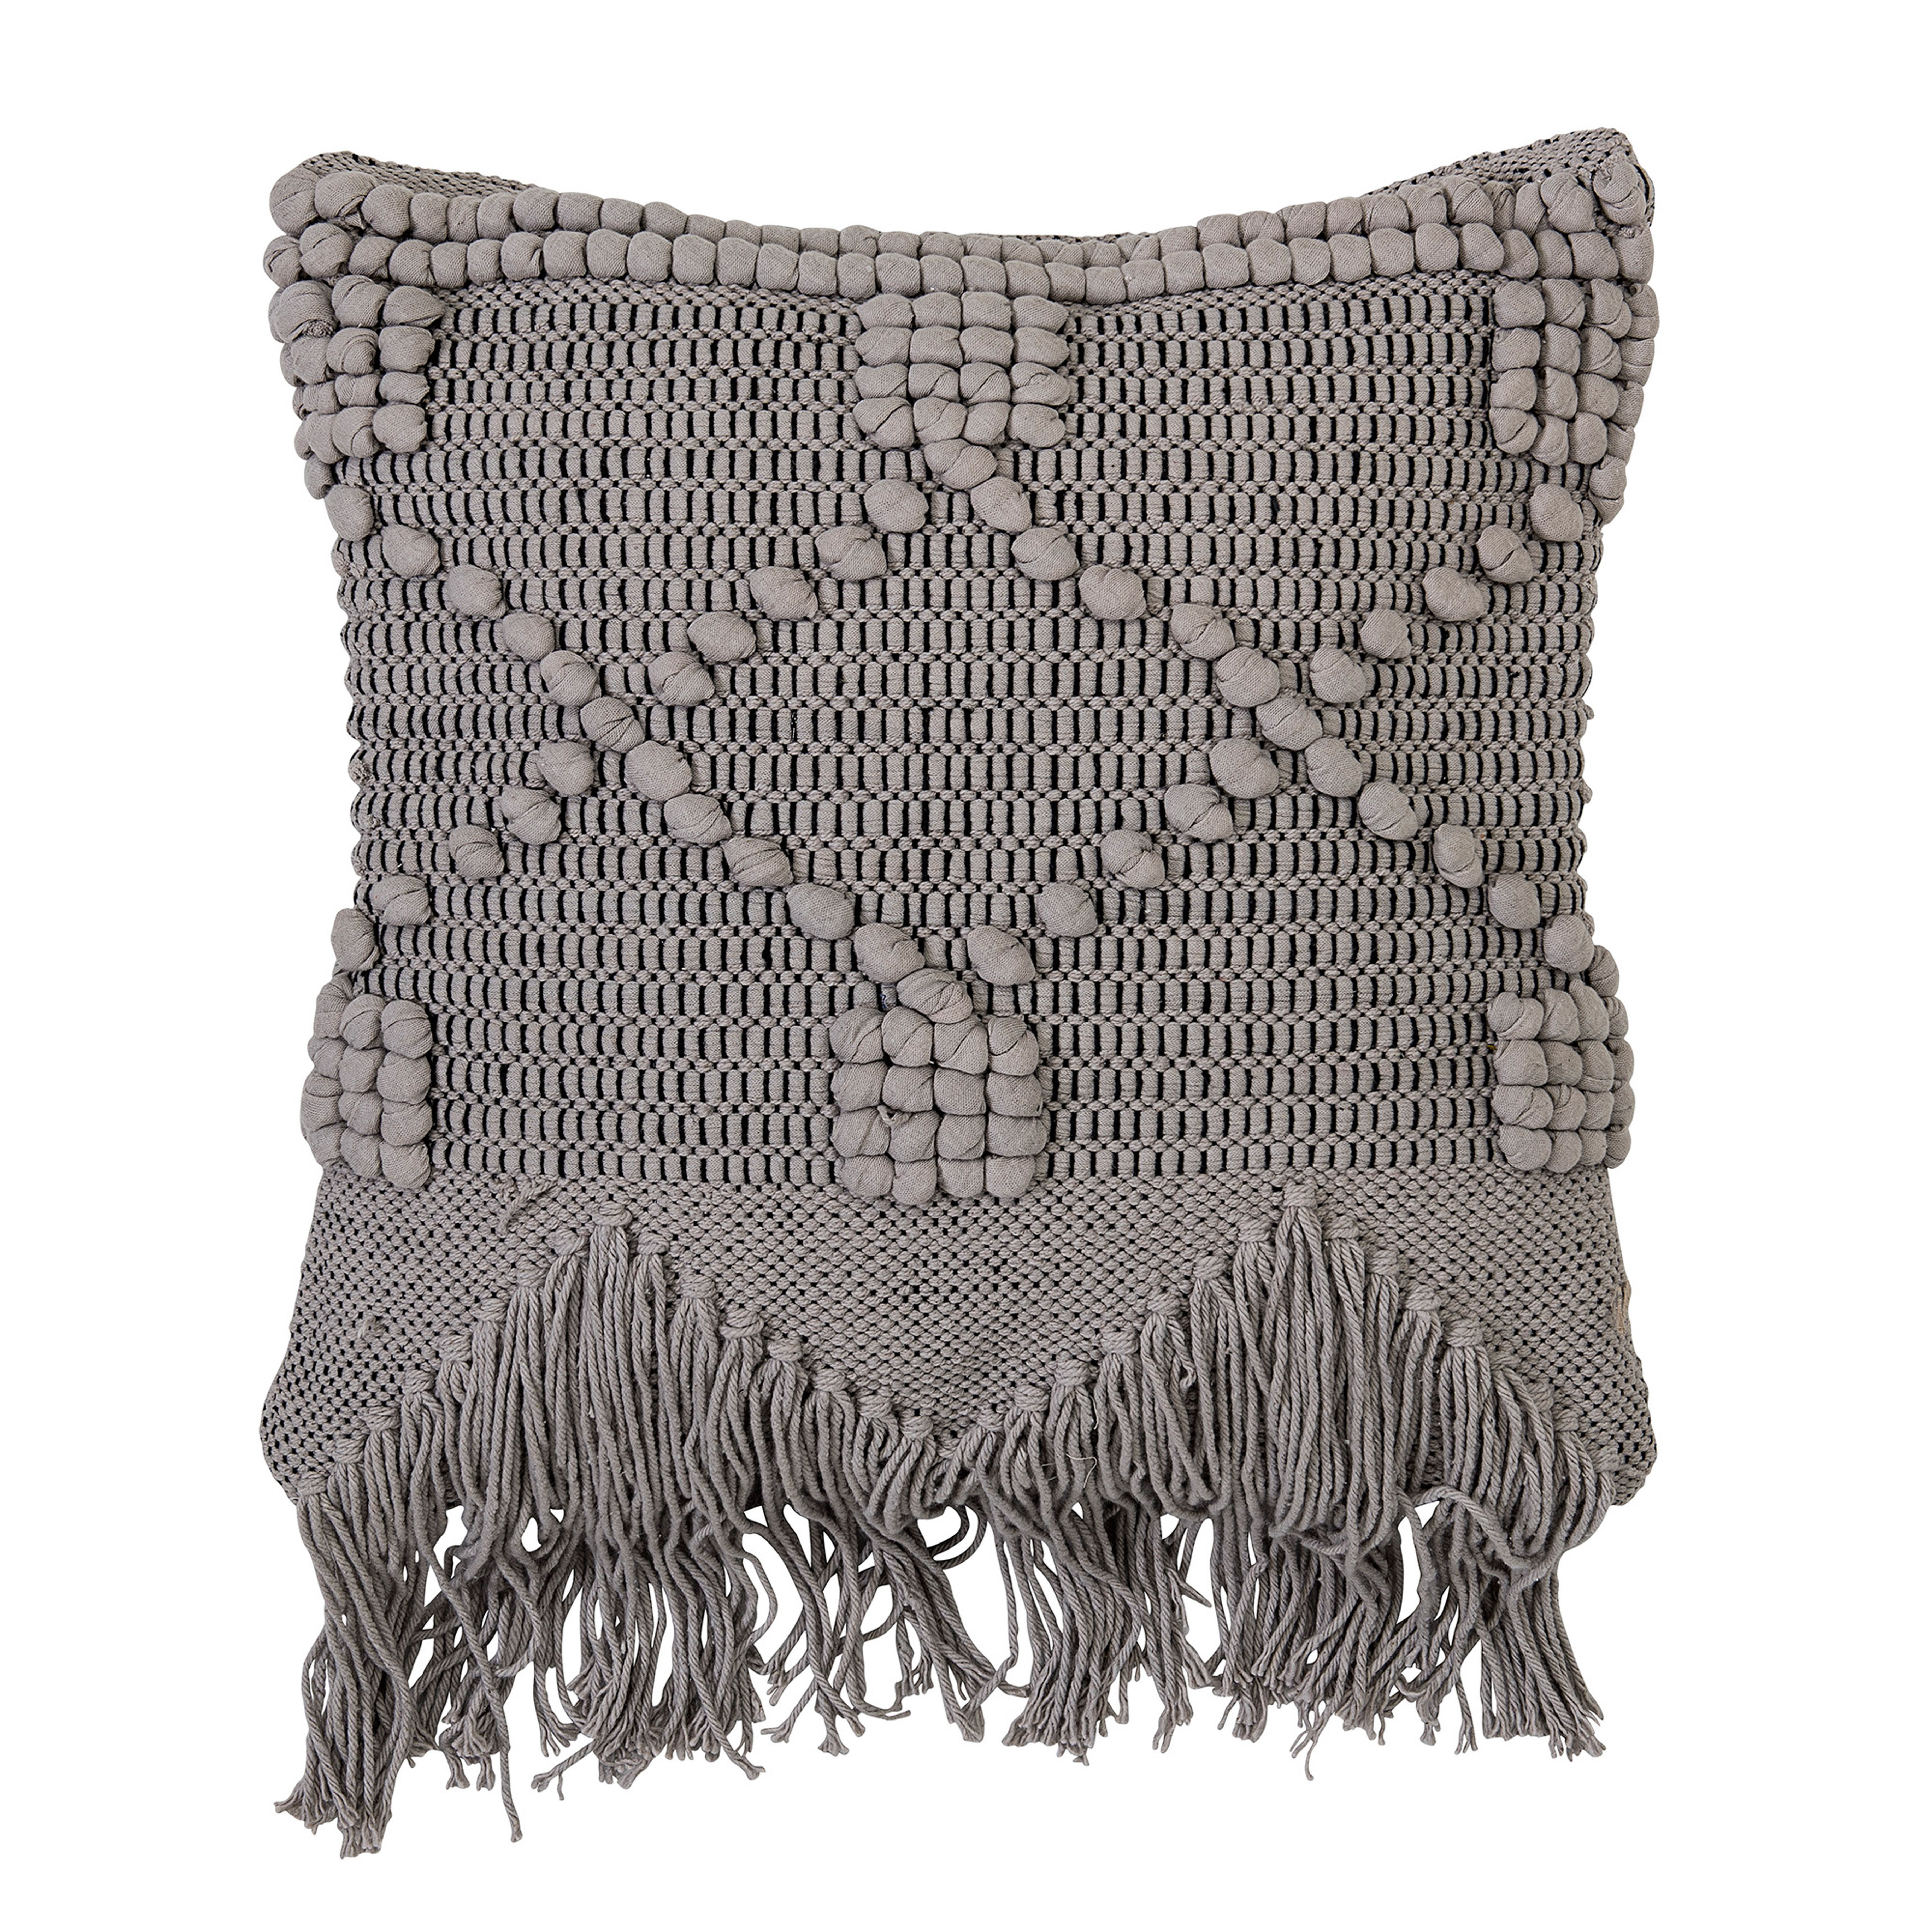 Textured Pillow with Fringe, Gray Cotton, 18" x 18" - Moss & Wilder